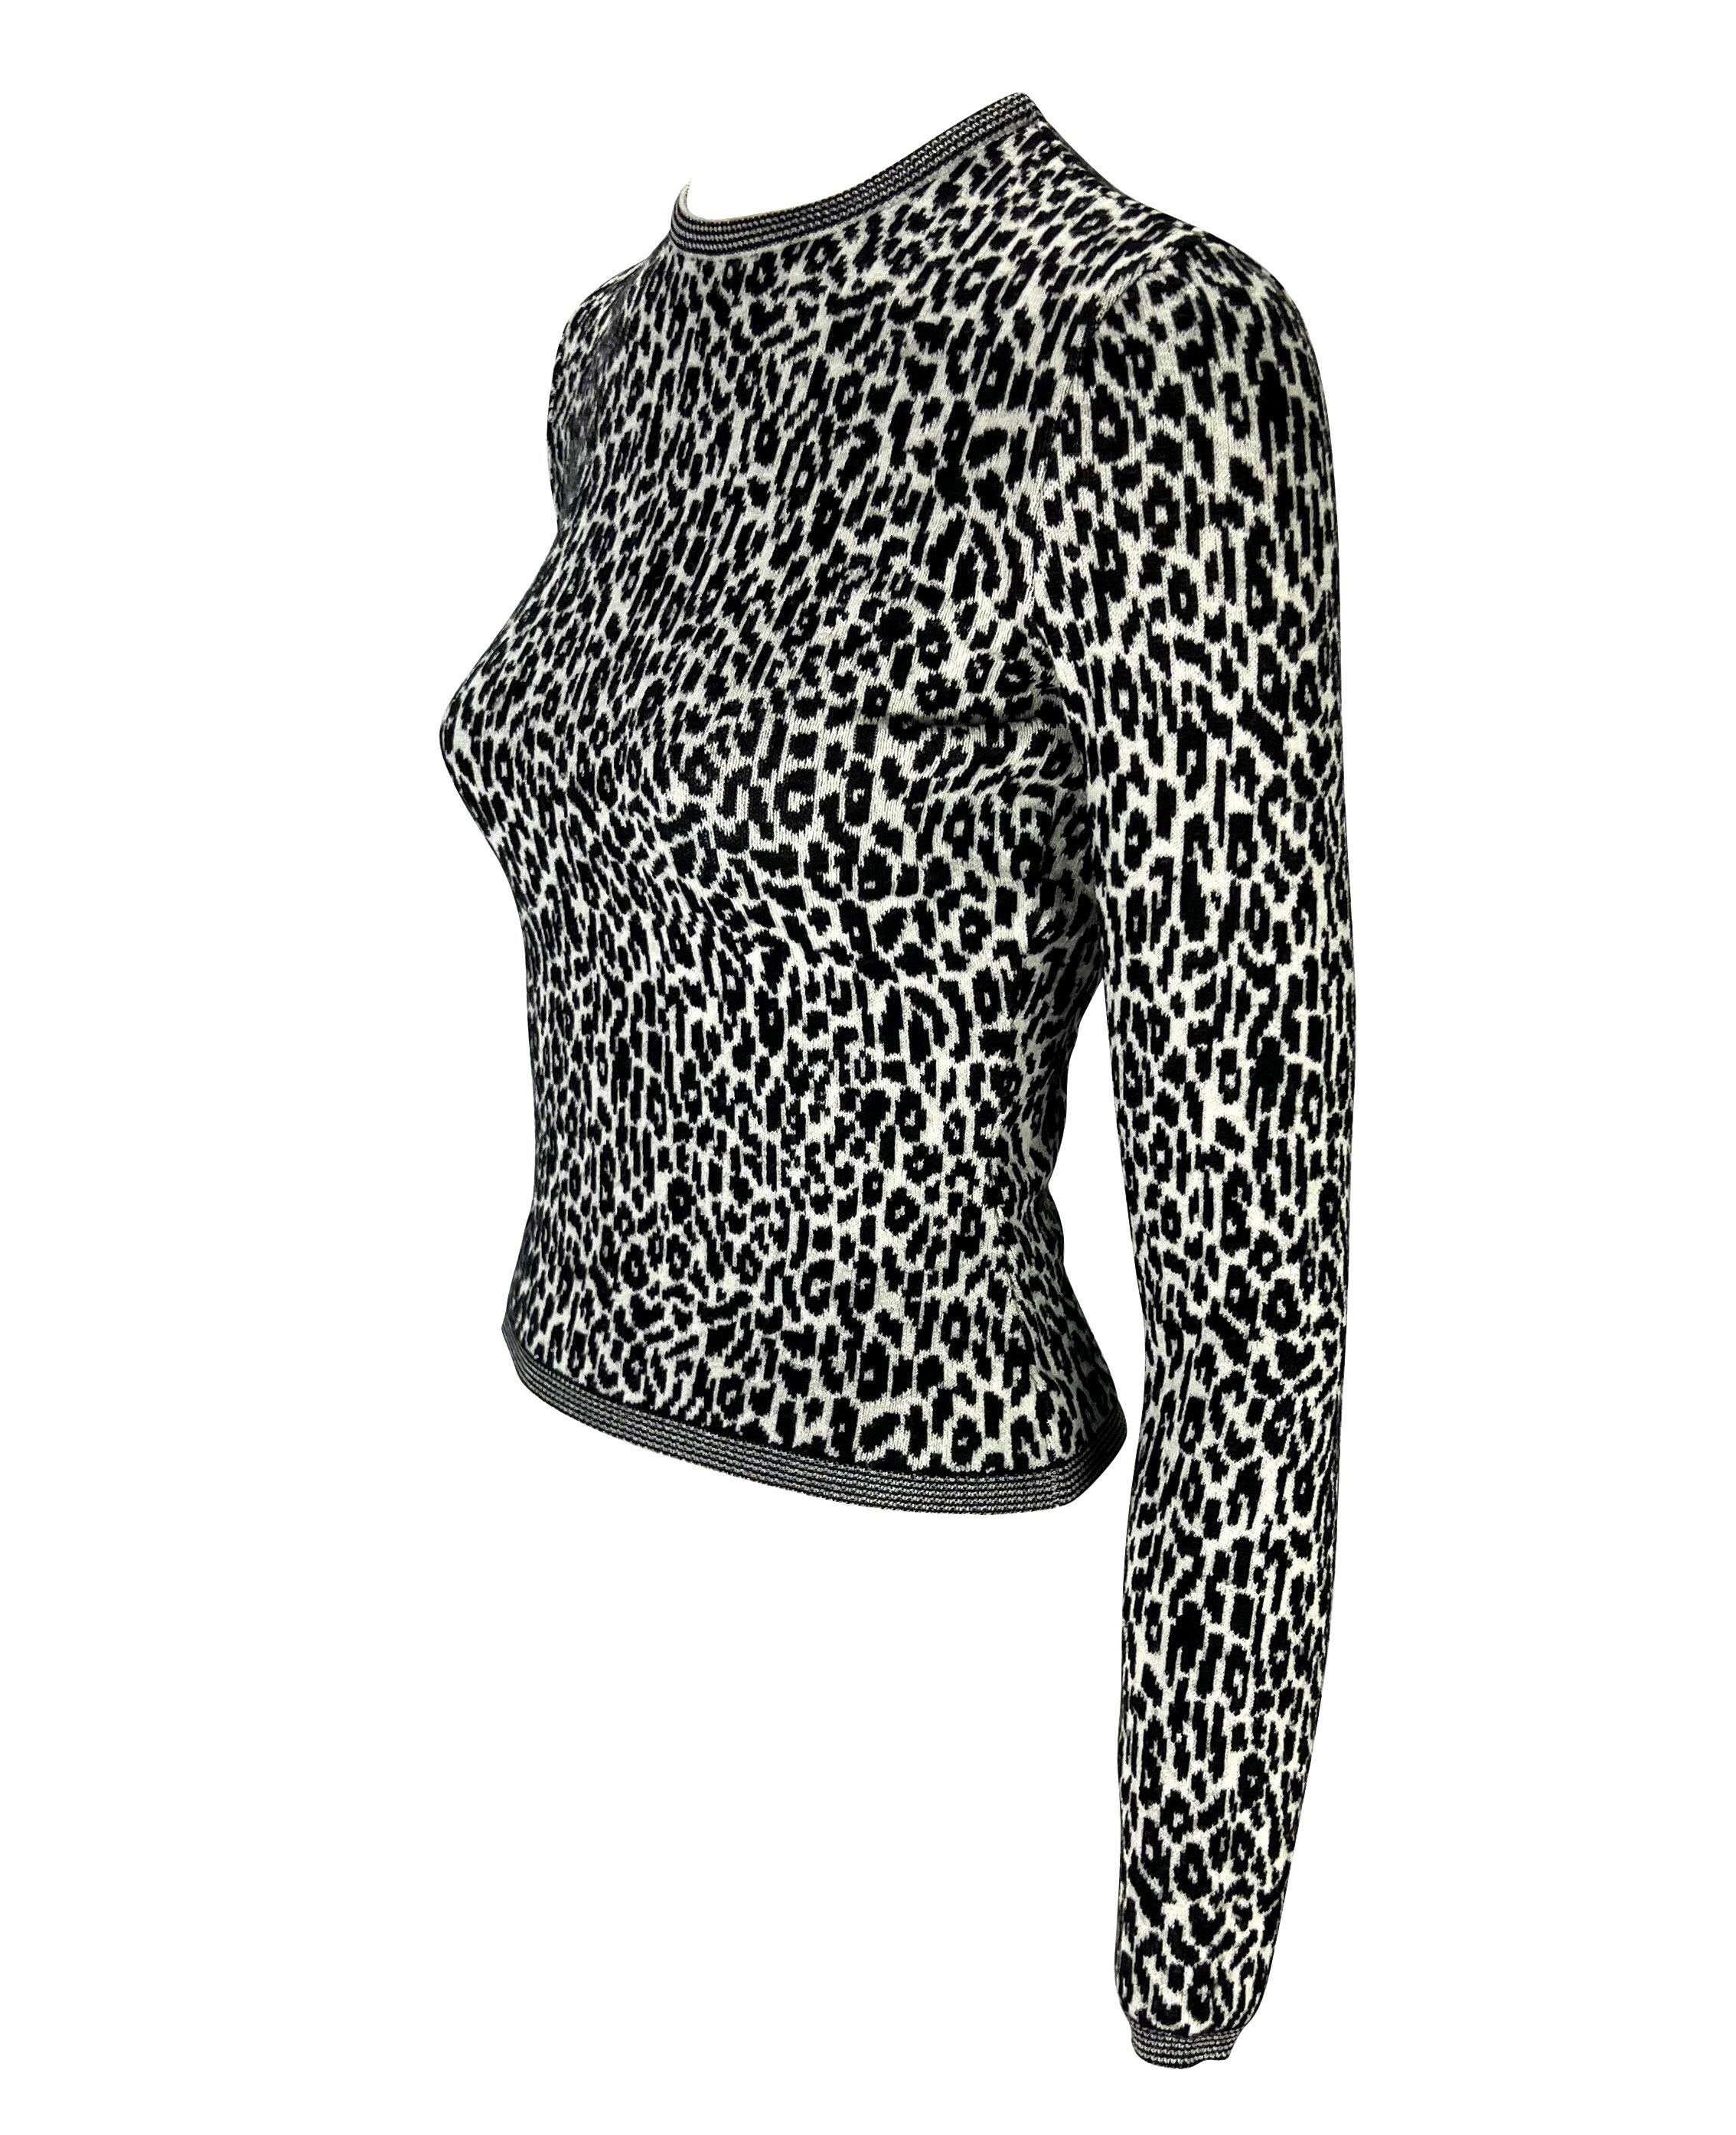 Presenting a black and white cheetah print Gianni Versace sweater, designed by Gianni Versace. From the 1990s, this beautiful sweater is covered in black and white cheetah print and is made complete with striped details around the collar, cuffs, and